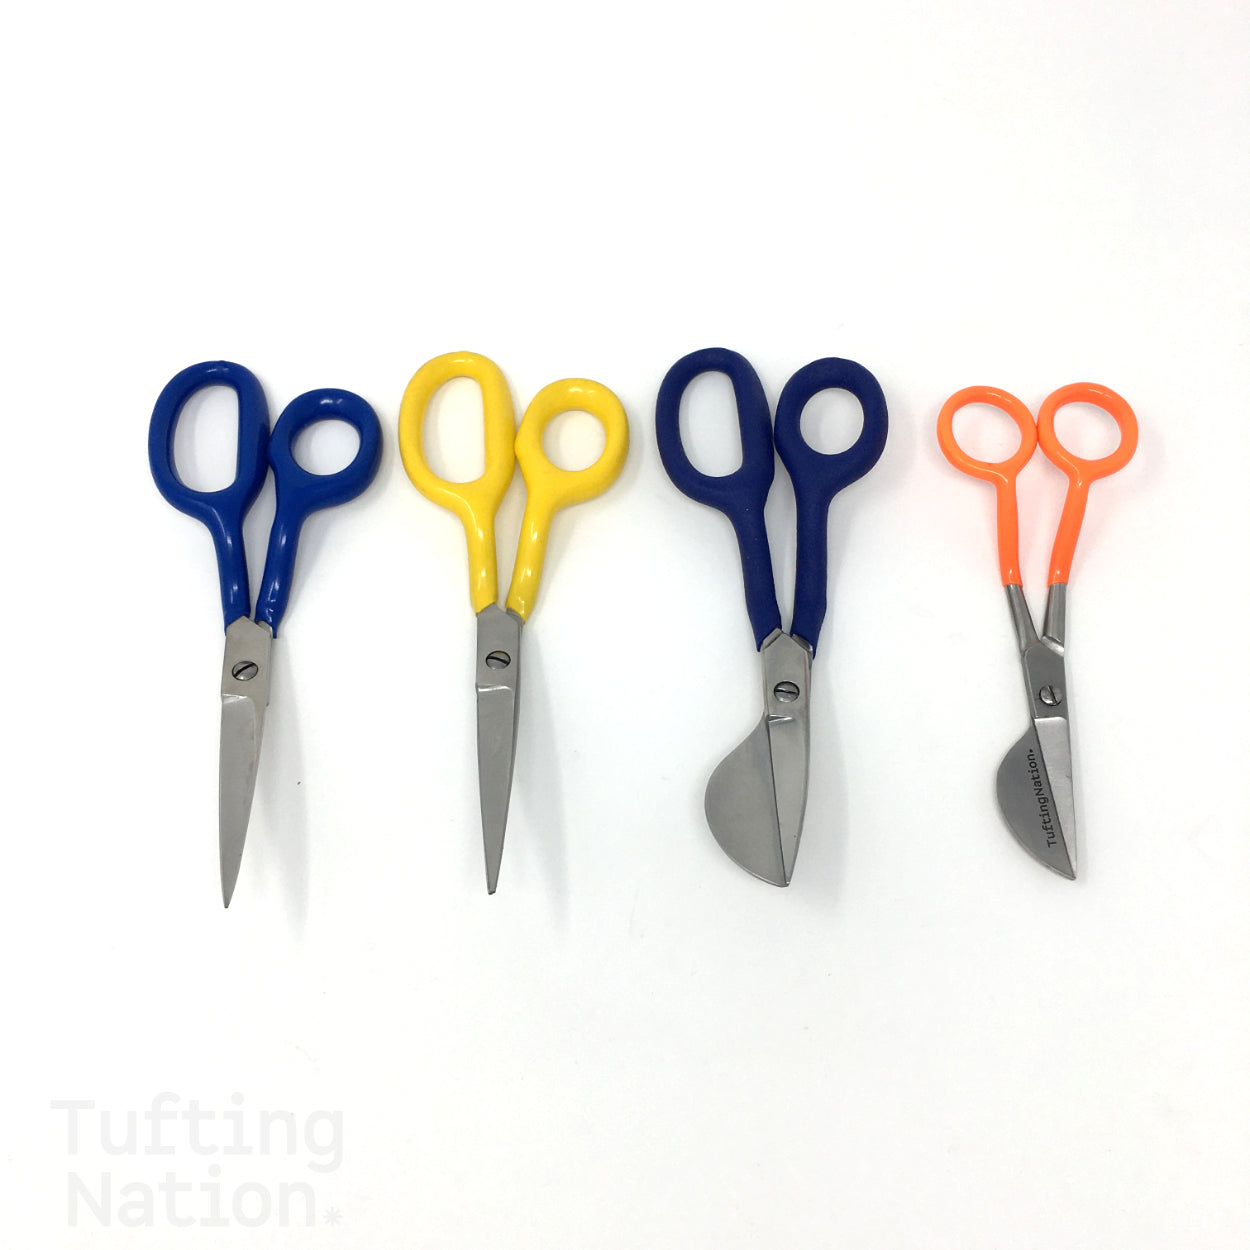 High quality rug tufting tools. Rug Making Scissors set of 4 perfect for beginners and professional tufters. | TuftingNation Canada